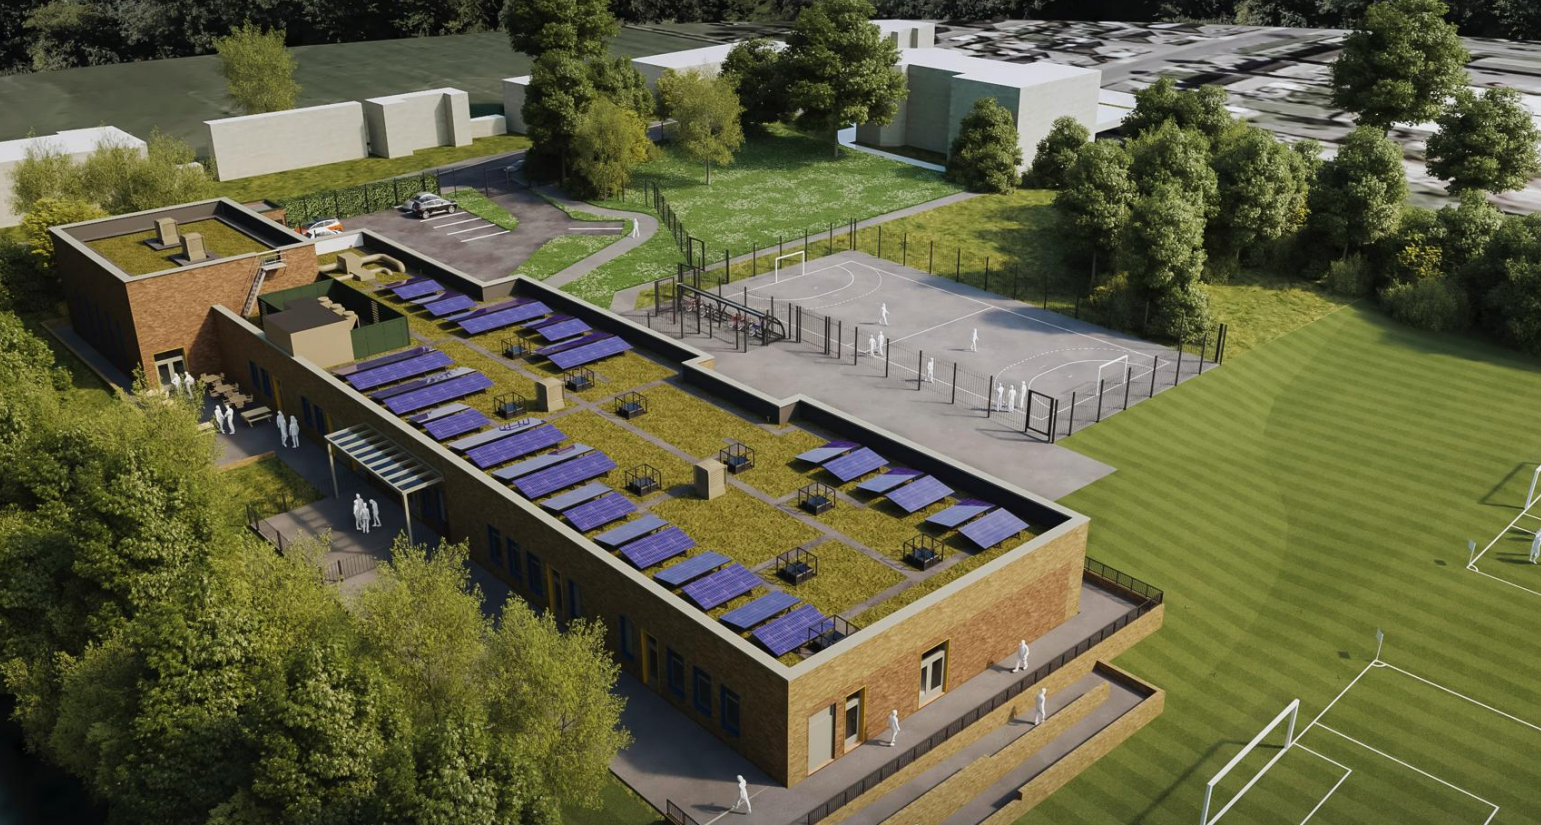 A visualisation of a school with a green roof and solar panels